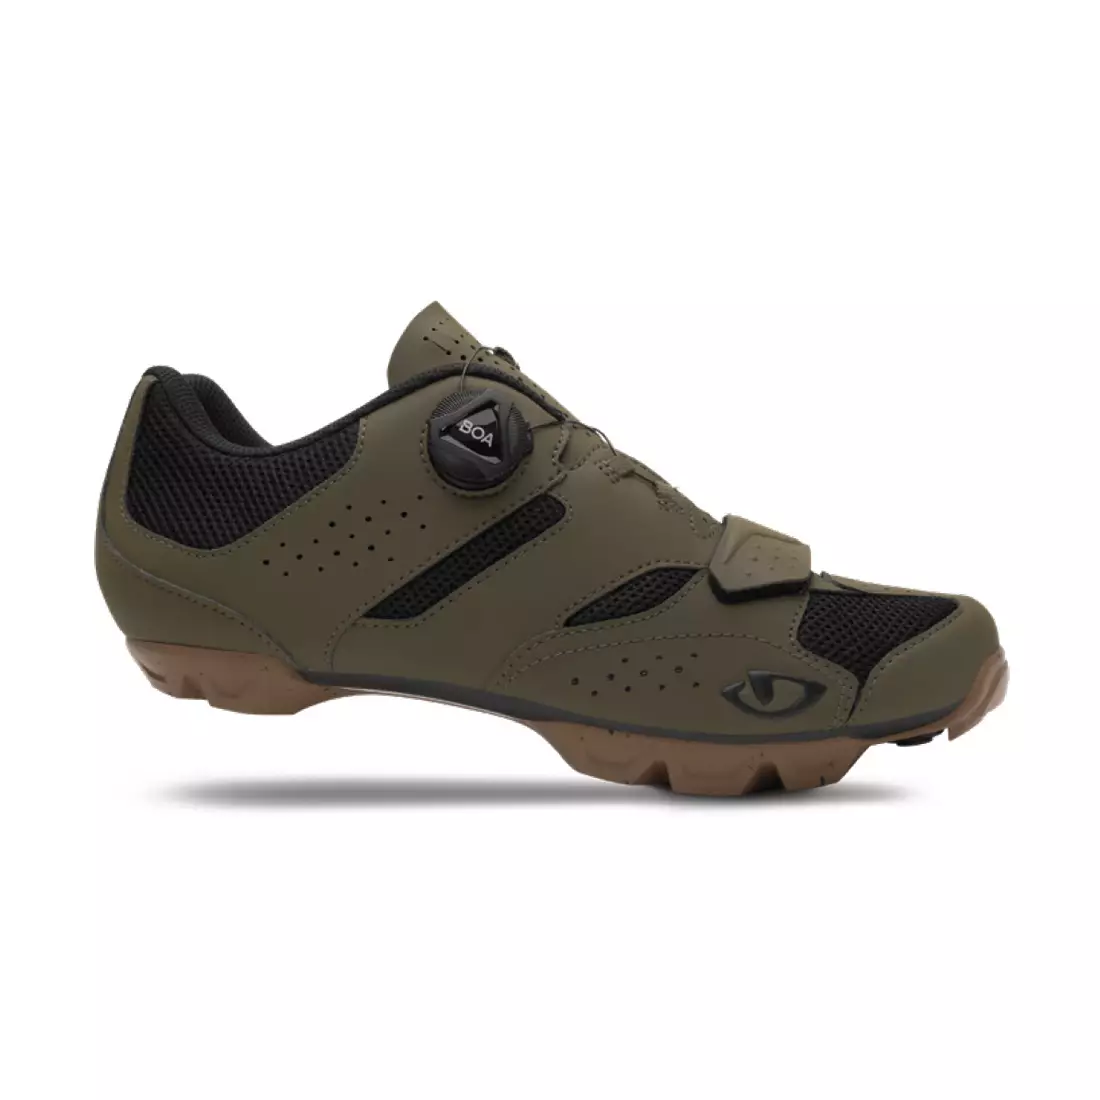 GIRO men's bicycle shoes CYLINDER II olive gum GR-7126228